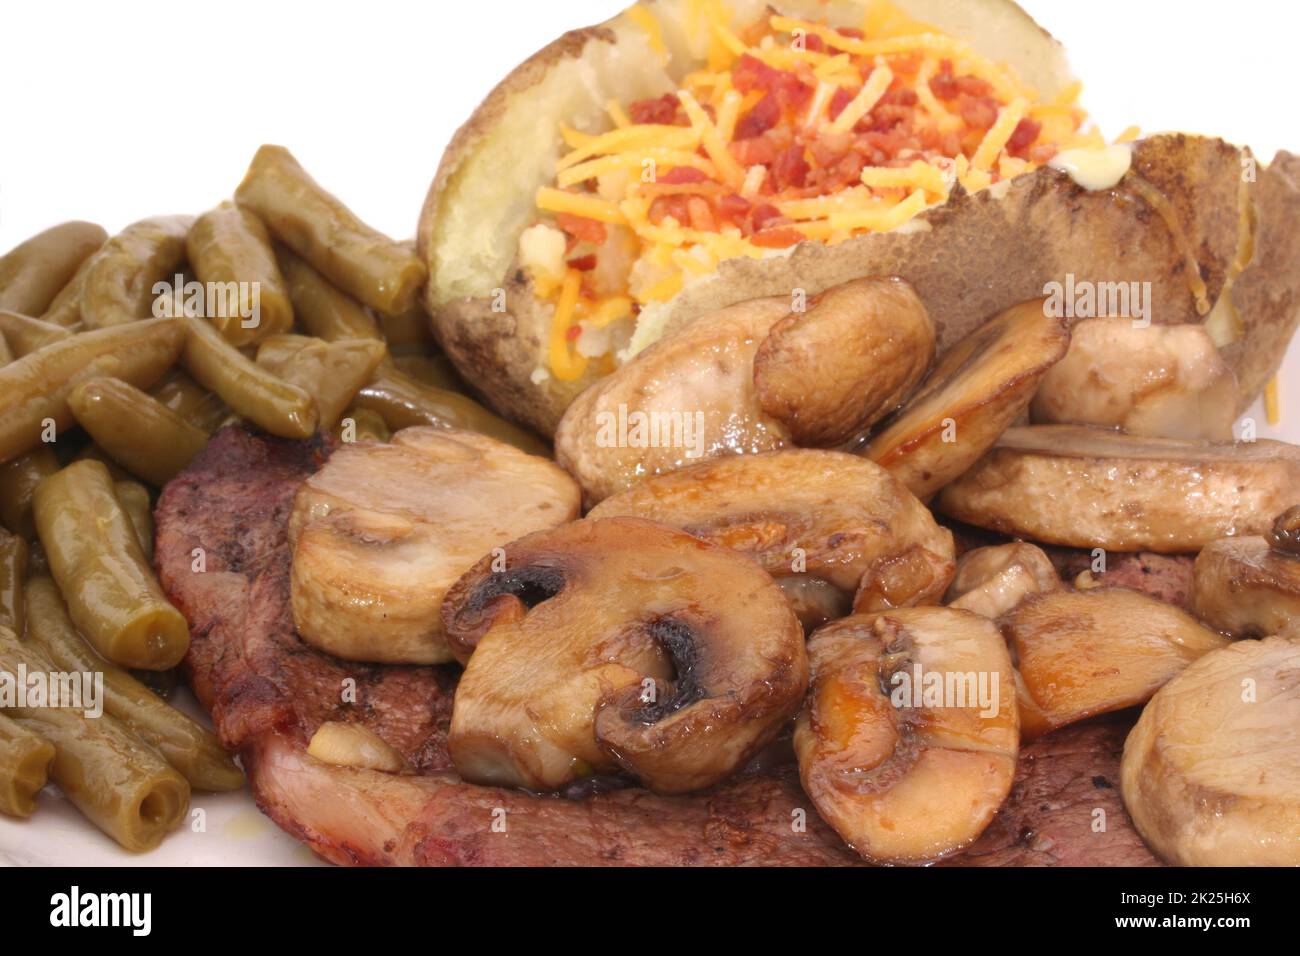 Steak and Mushrooms With Green Beans and Potato Stock Photo